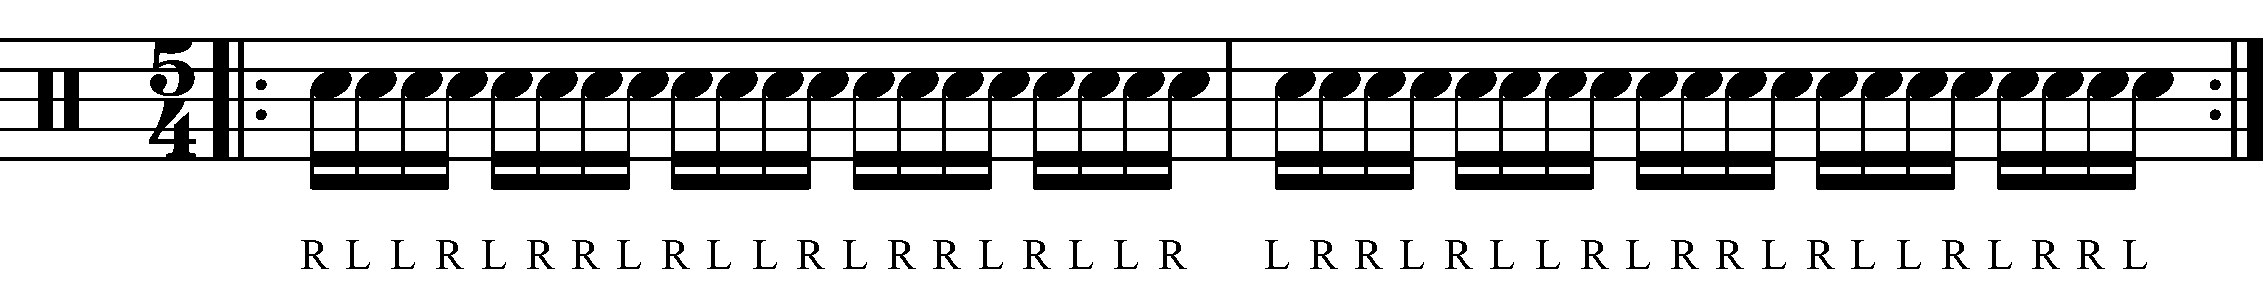 An Inverted Paradiddle in 5/4 with standard sticking